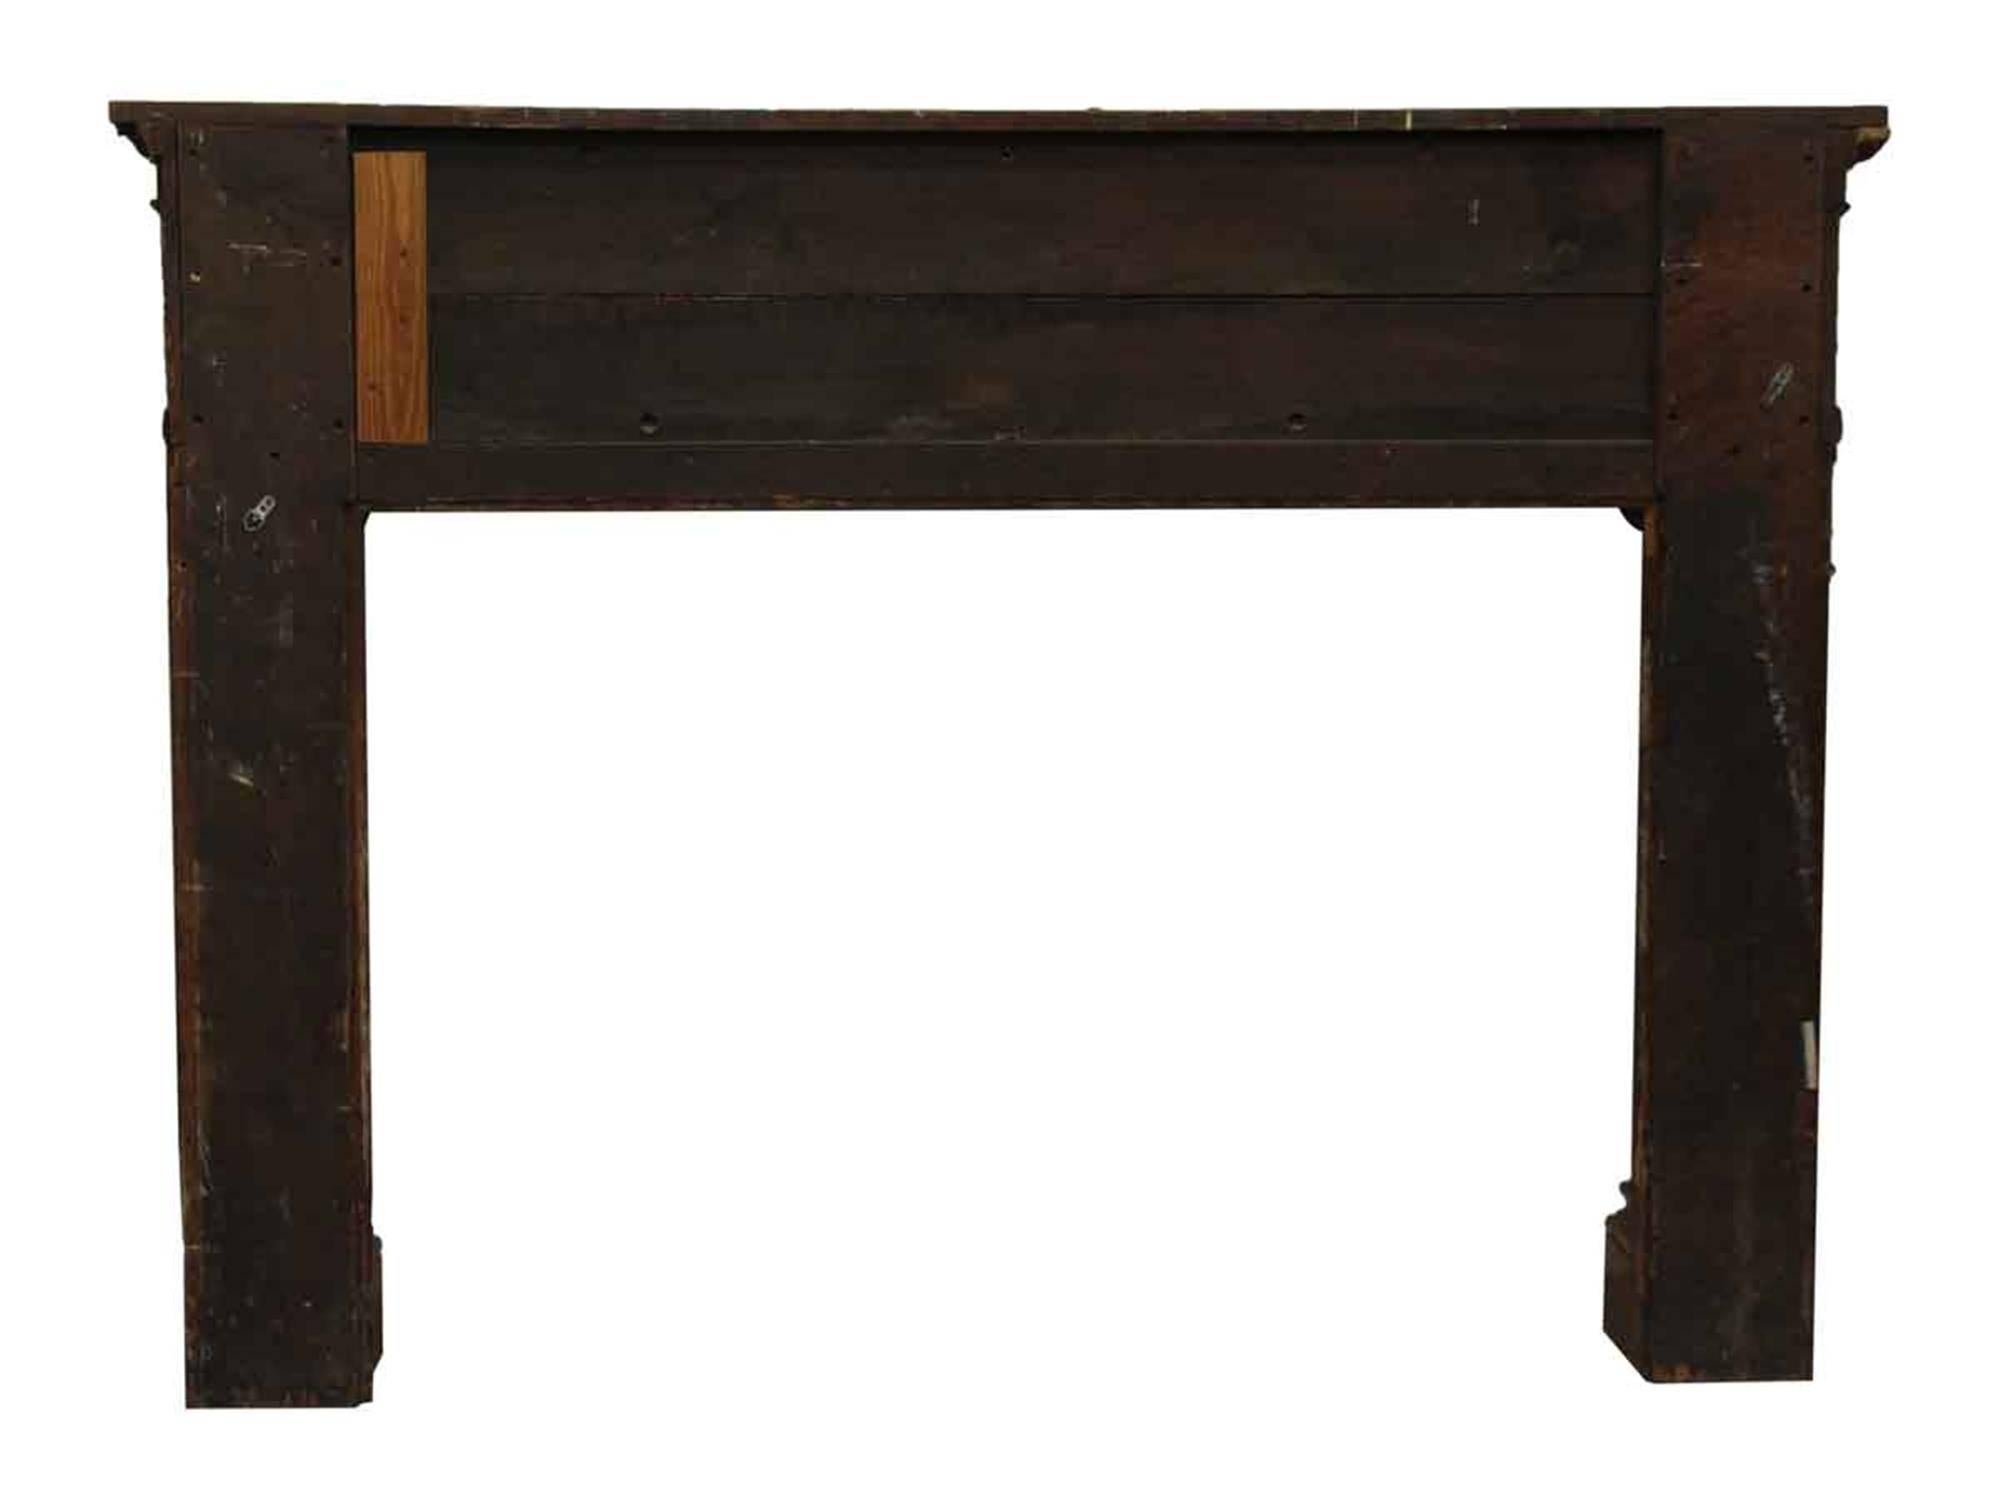 1920s Extra Wide Carved Oak Mantel with Hand-Carved Details 4